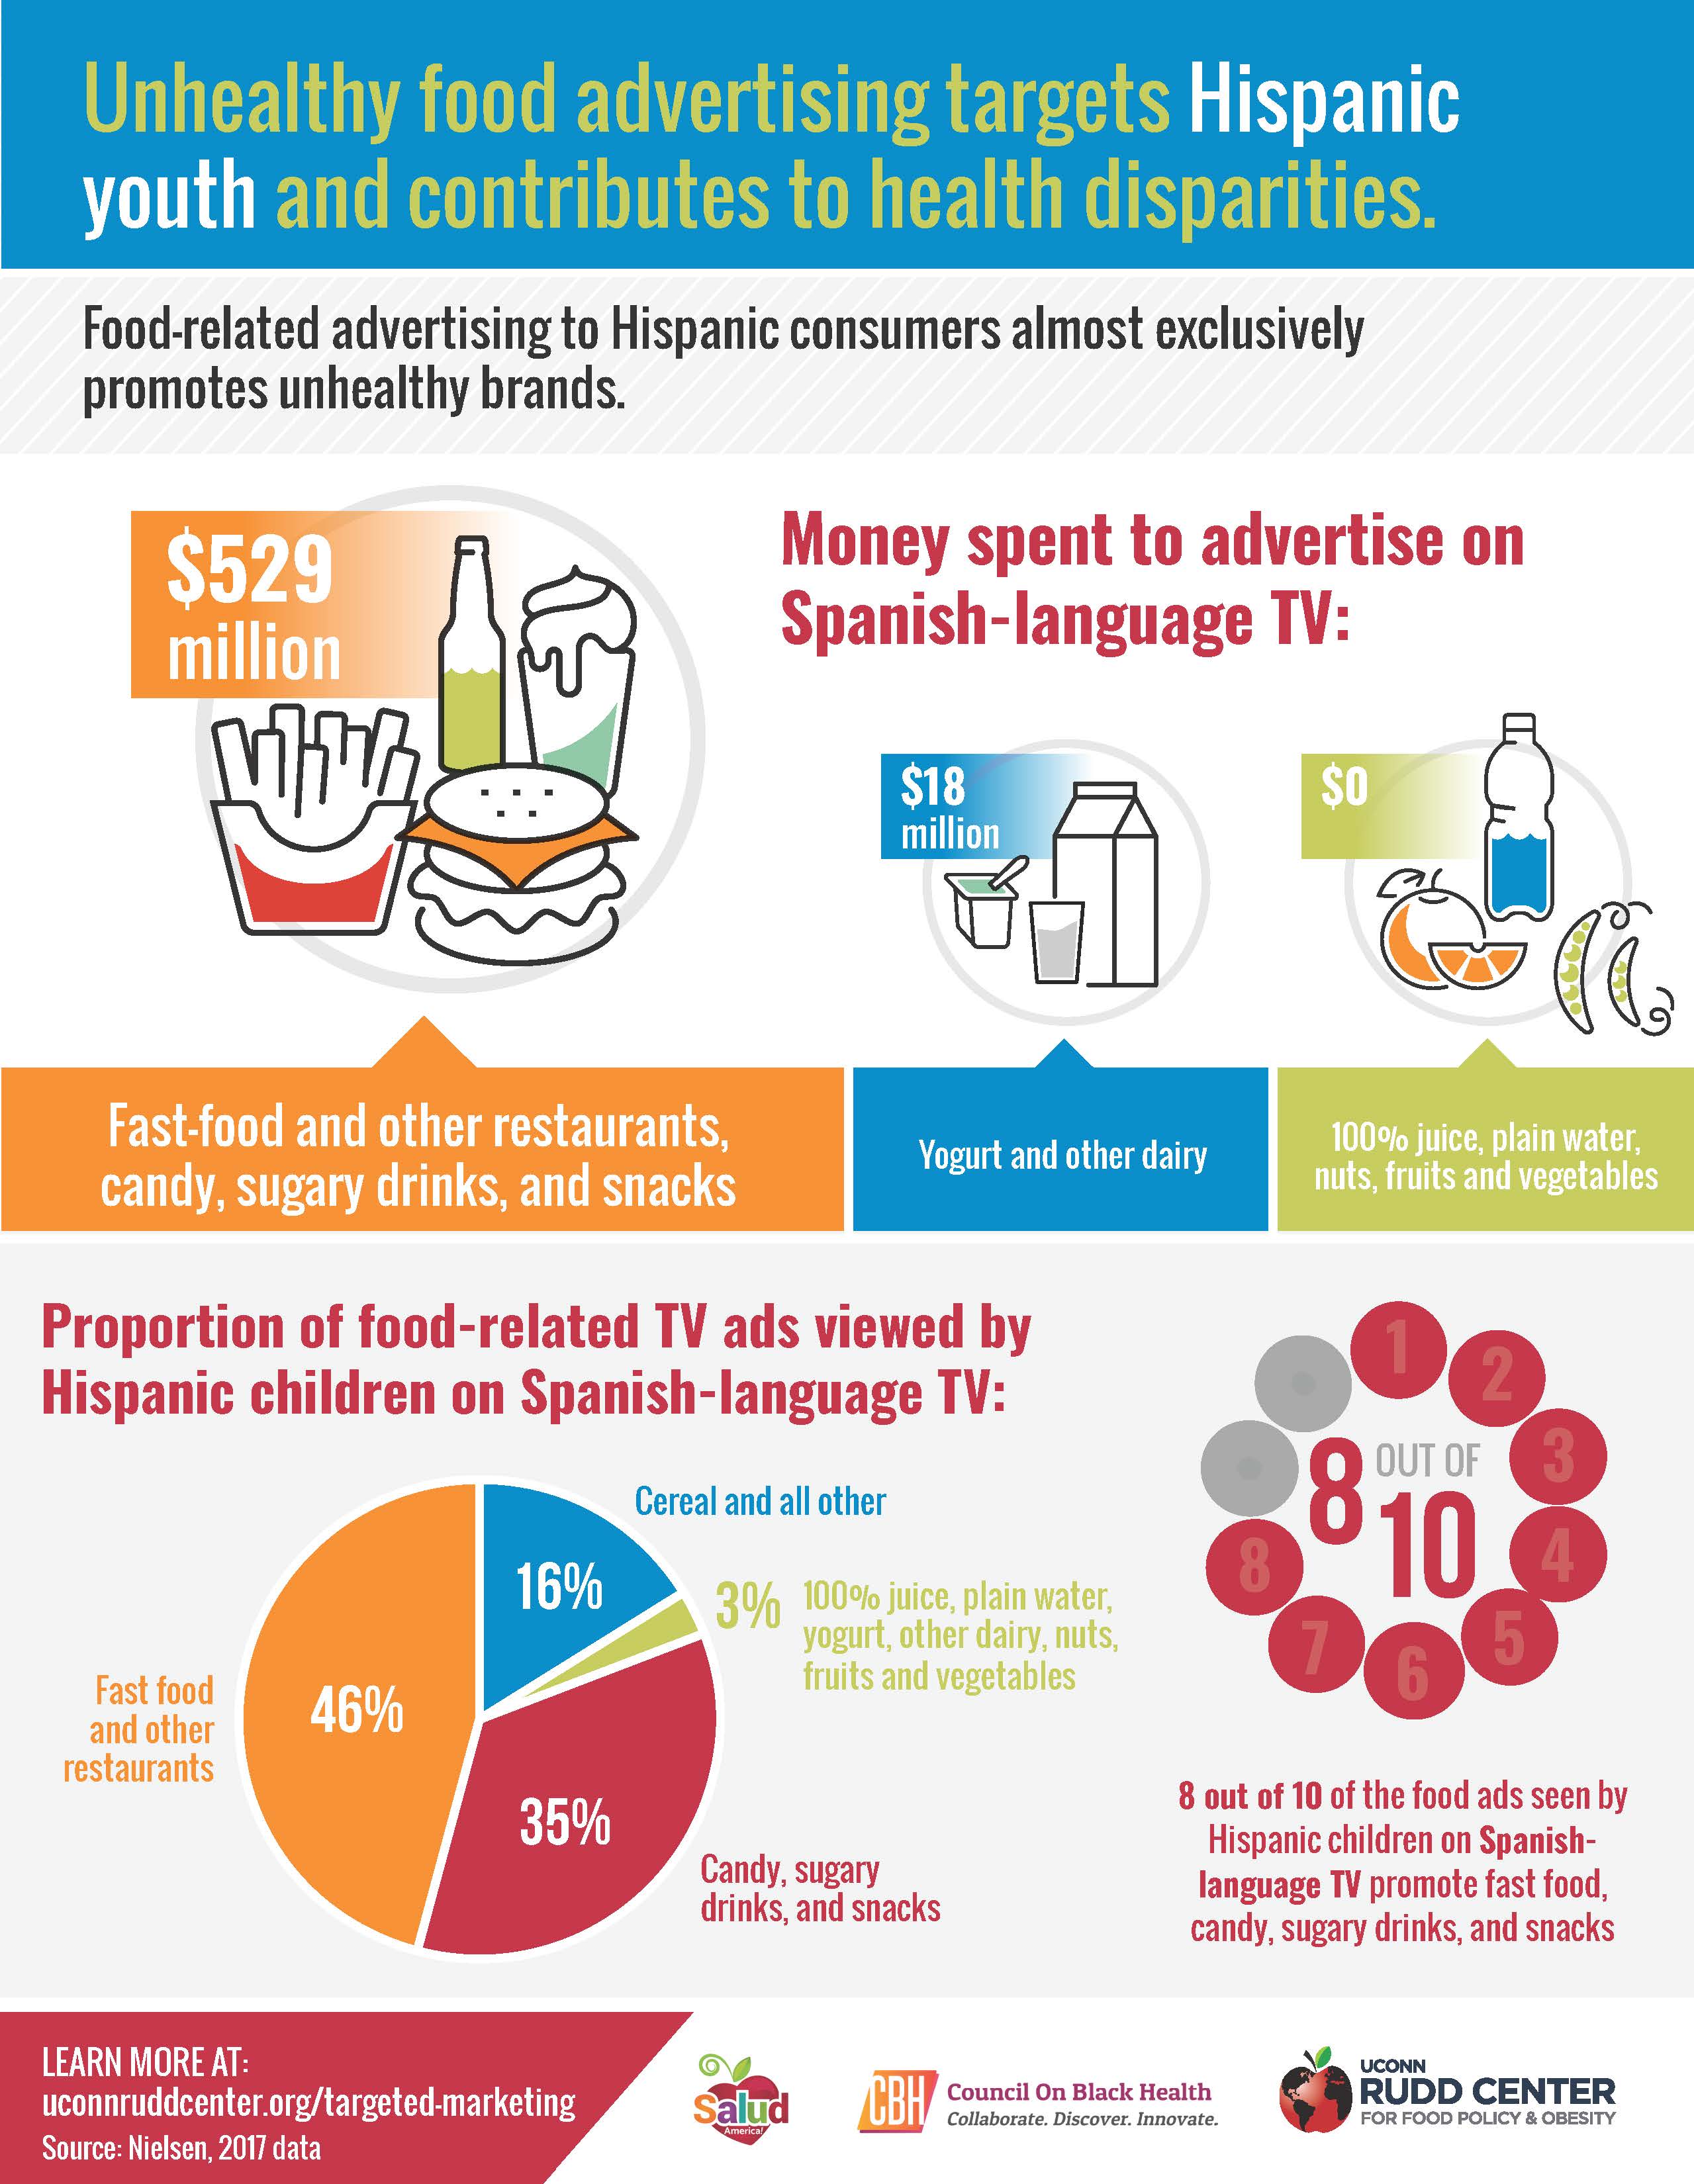 Unhealthy food advertising targets Hispanic youth and contributes to health disparities. Source: UConn Rudd Center